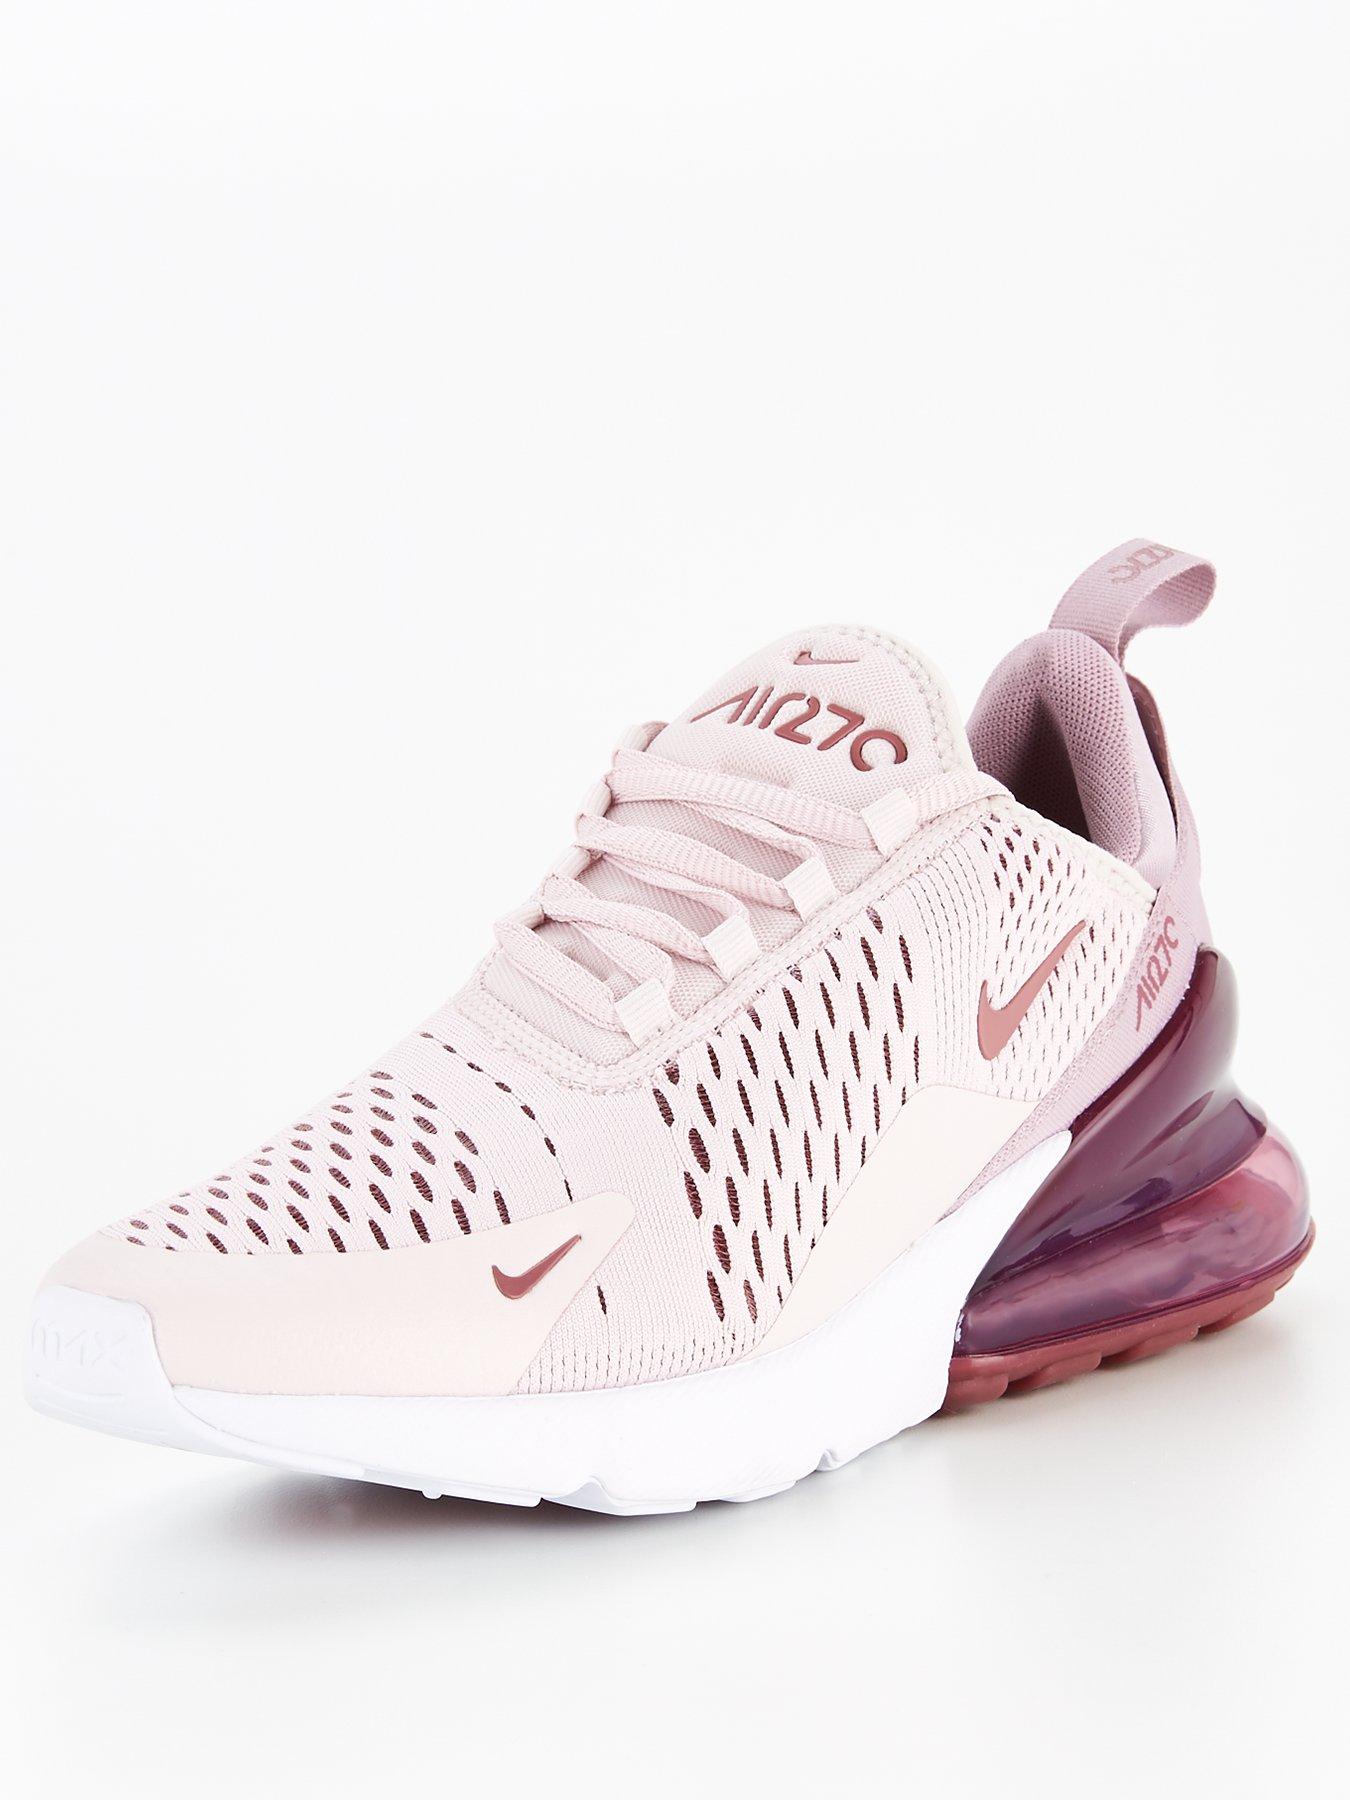 air max 270 pink and red